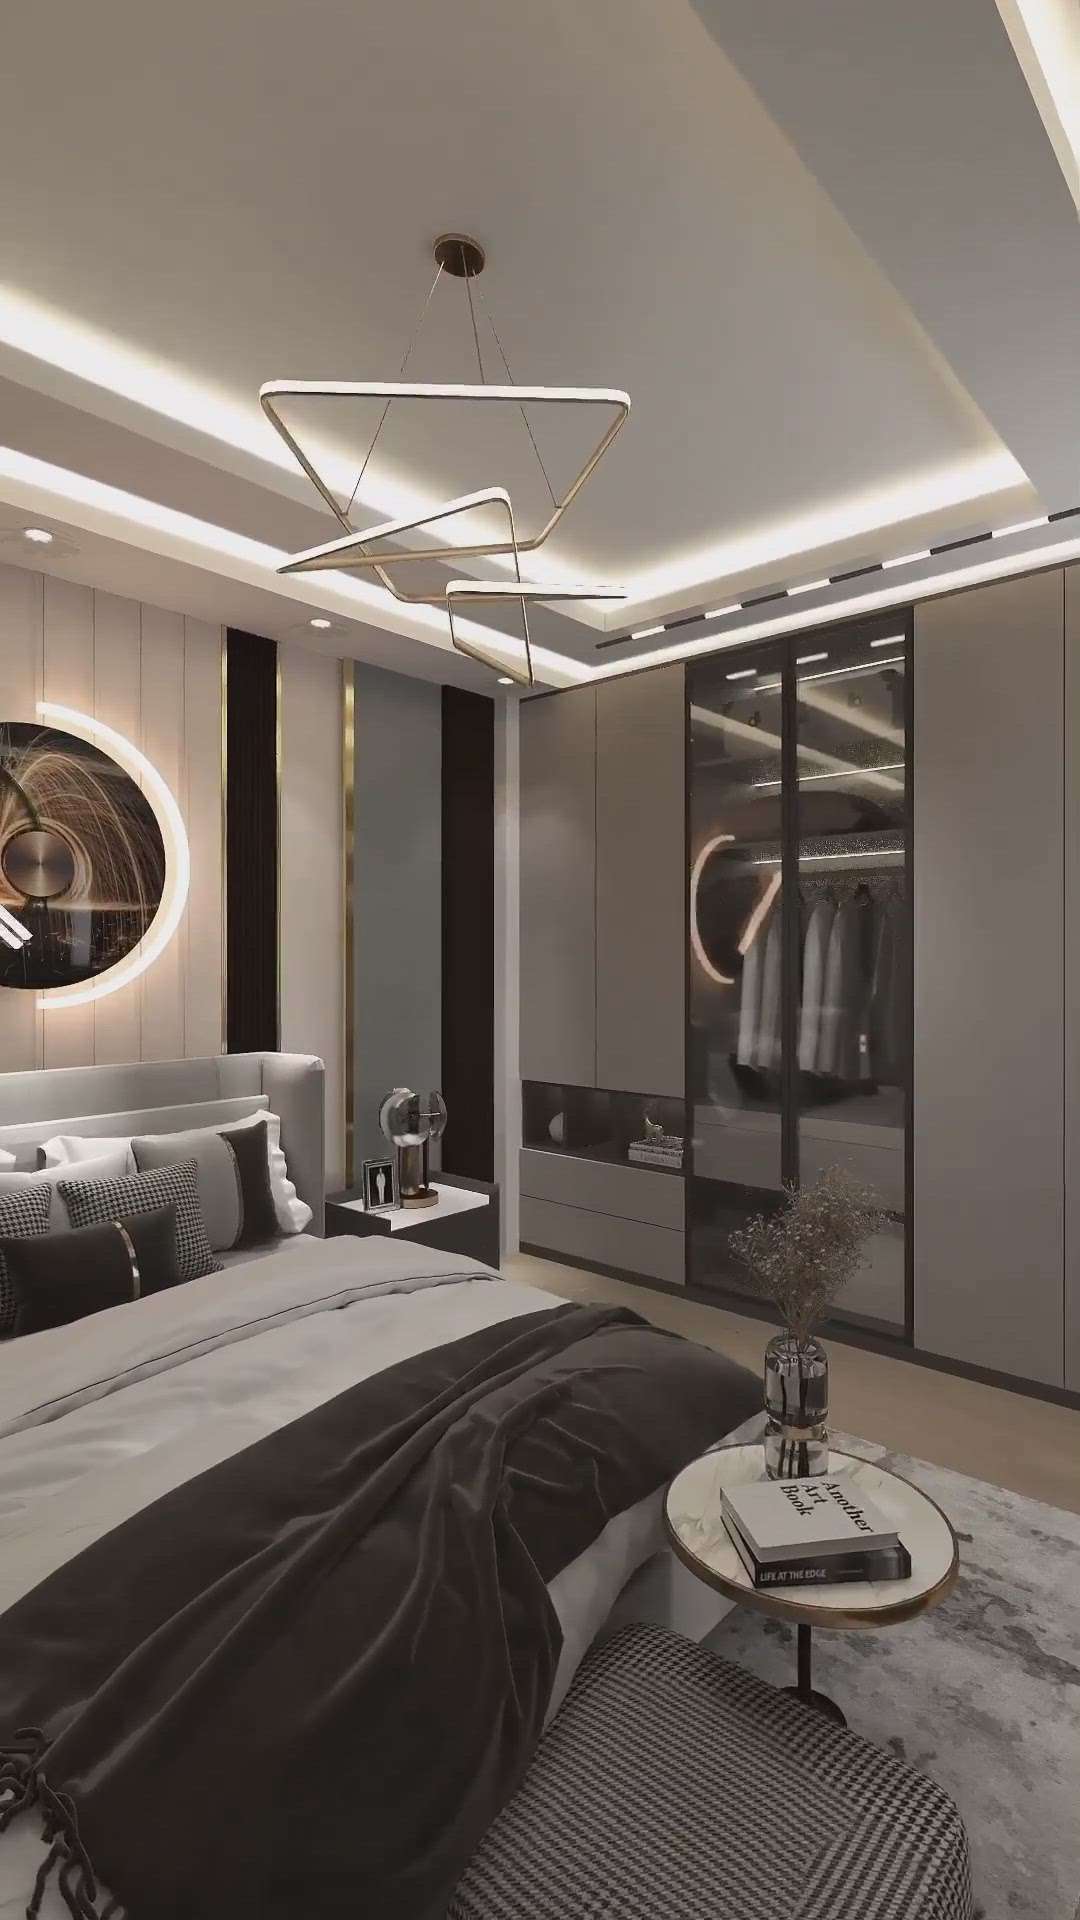 -Bedroom Interior Work
-Comment Down For Budget Quotation 
-Like, Share With Your Friends.
-Dm For Reasonable Rates.
-For Construction And Home Designs.
-We Do Vastu Work Also.
.
.
#InteriorDesigner #BedroomDecor #Architectural #budget #design